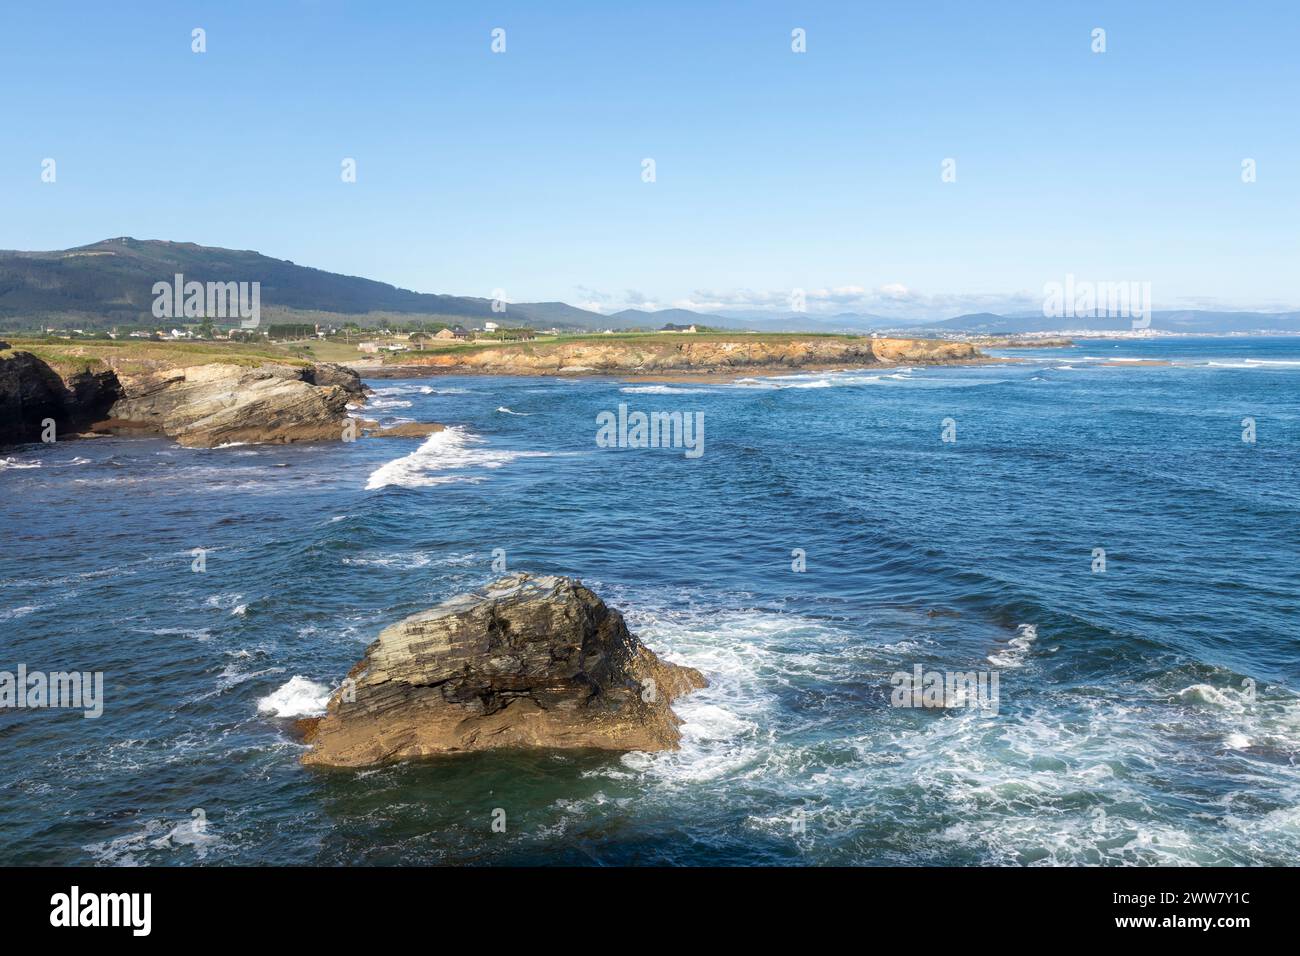 scenic coastline with rocky formations, blue waters, and distant mountains under a clear sky, exhibiting natural beauty Stock Photo